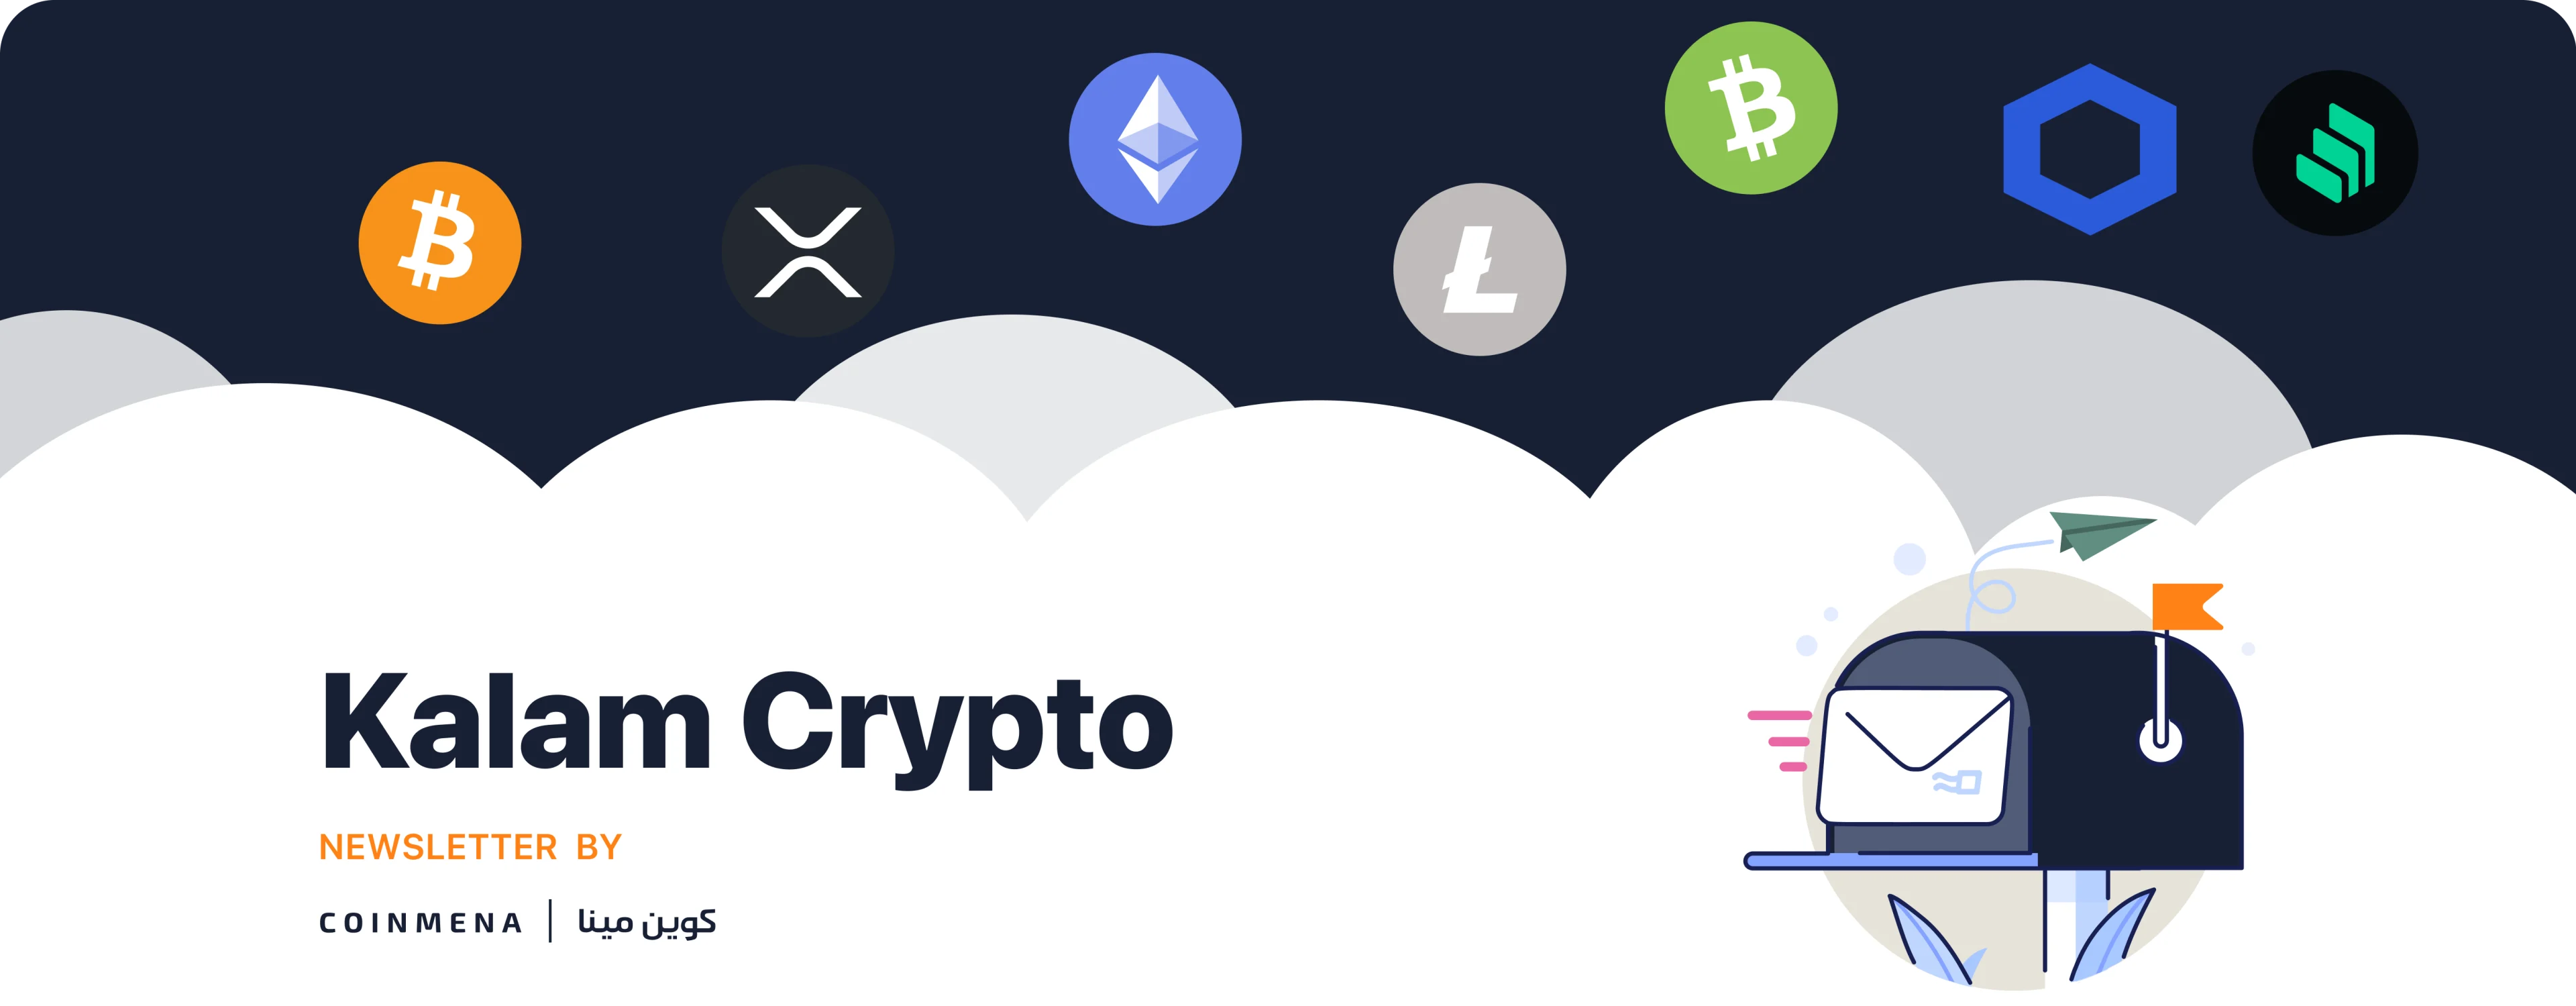 Kalam Crypto #25: Terra 2.0 is born, a16z launches largest crypto fund, and more